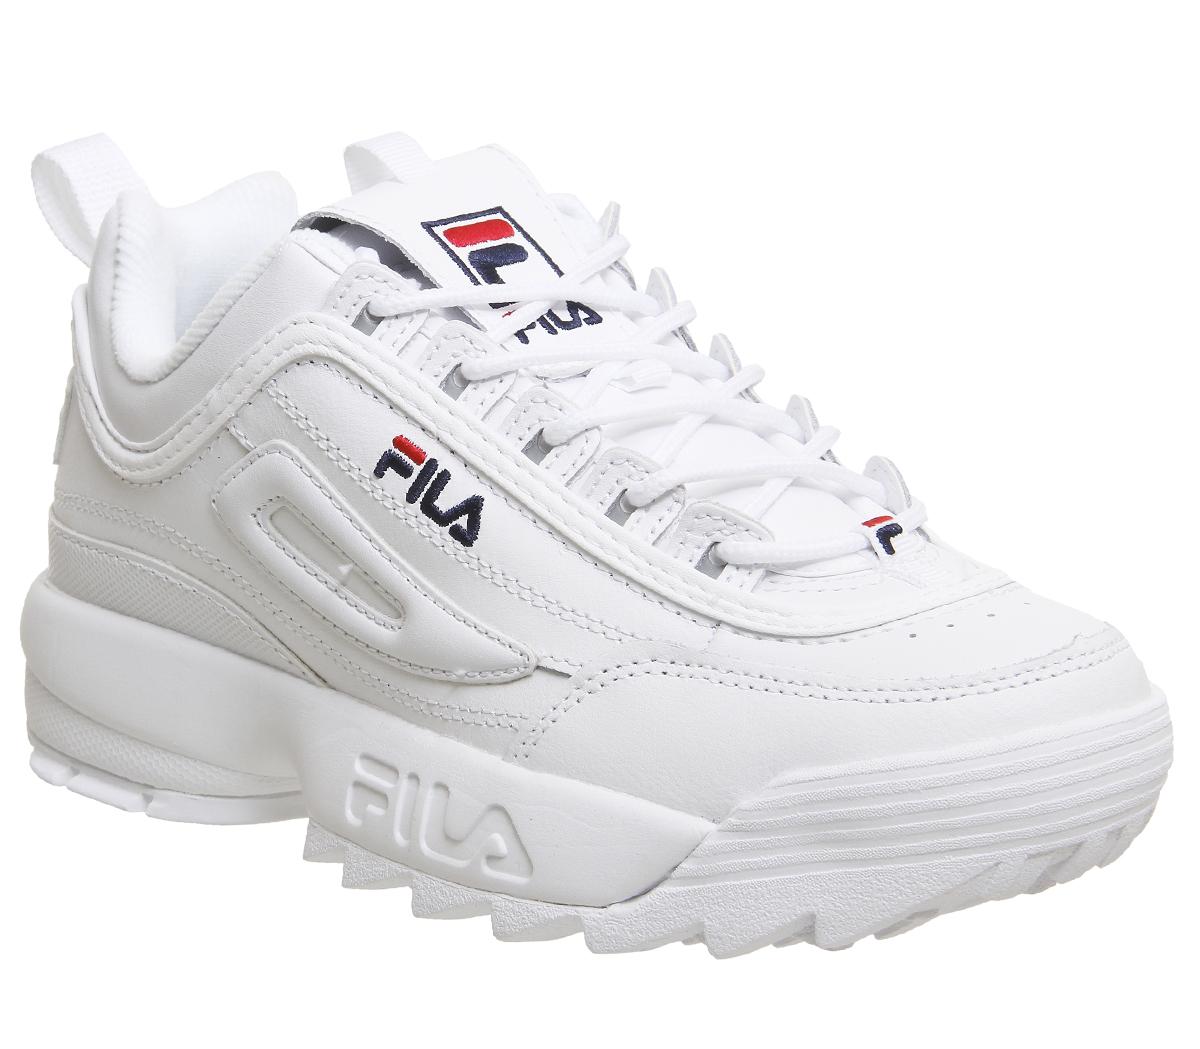 Fila Disruptor II Trainers White Leather - Hers trainers